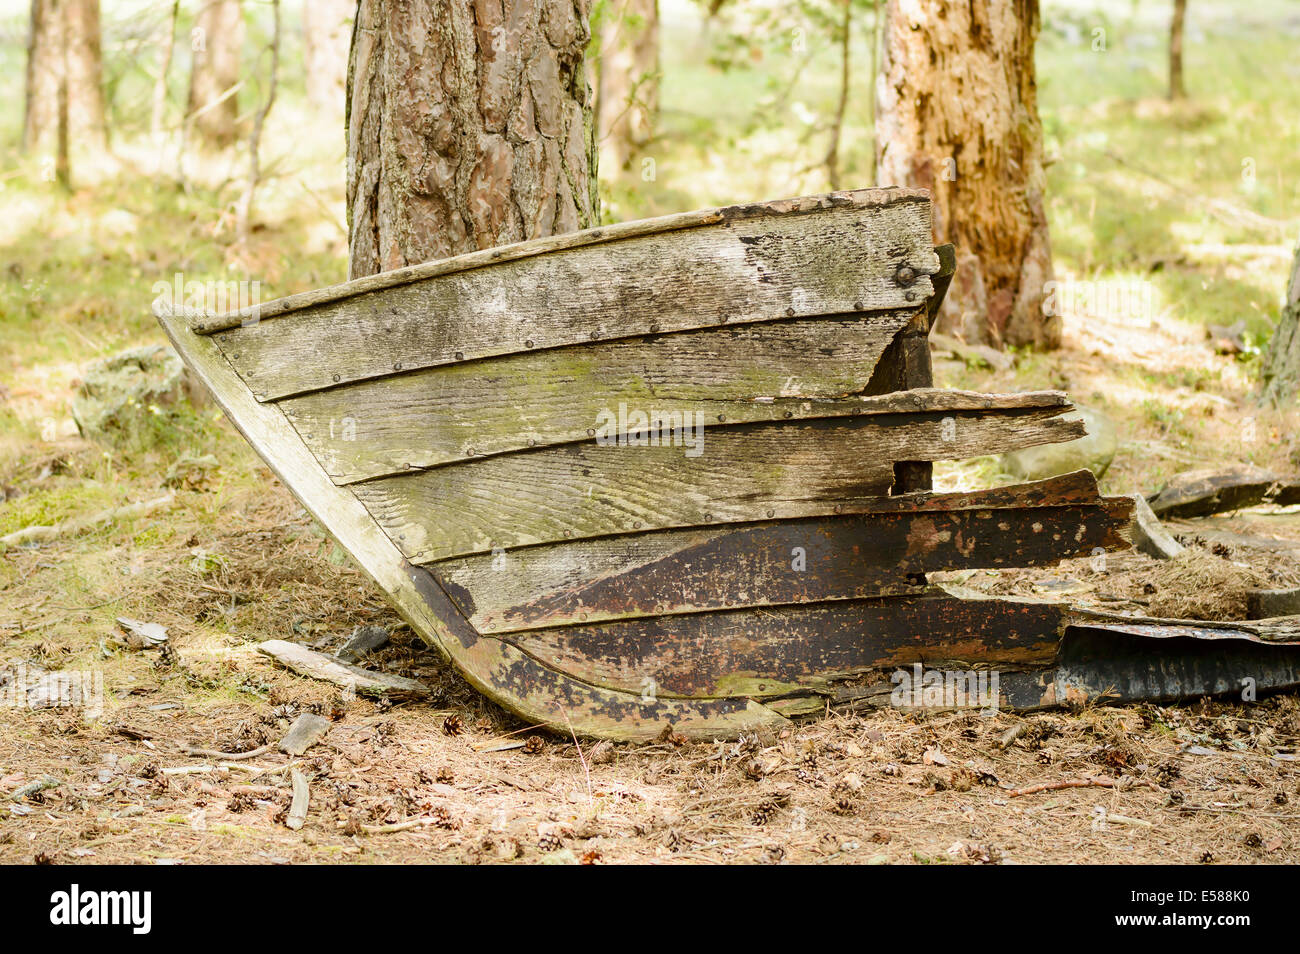 Old and weathered boat rotting away on dry land in pine forrest. Stock Photo